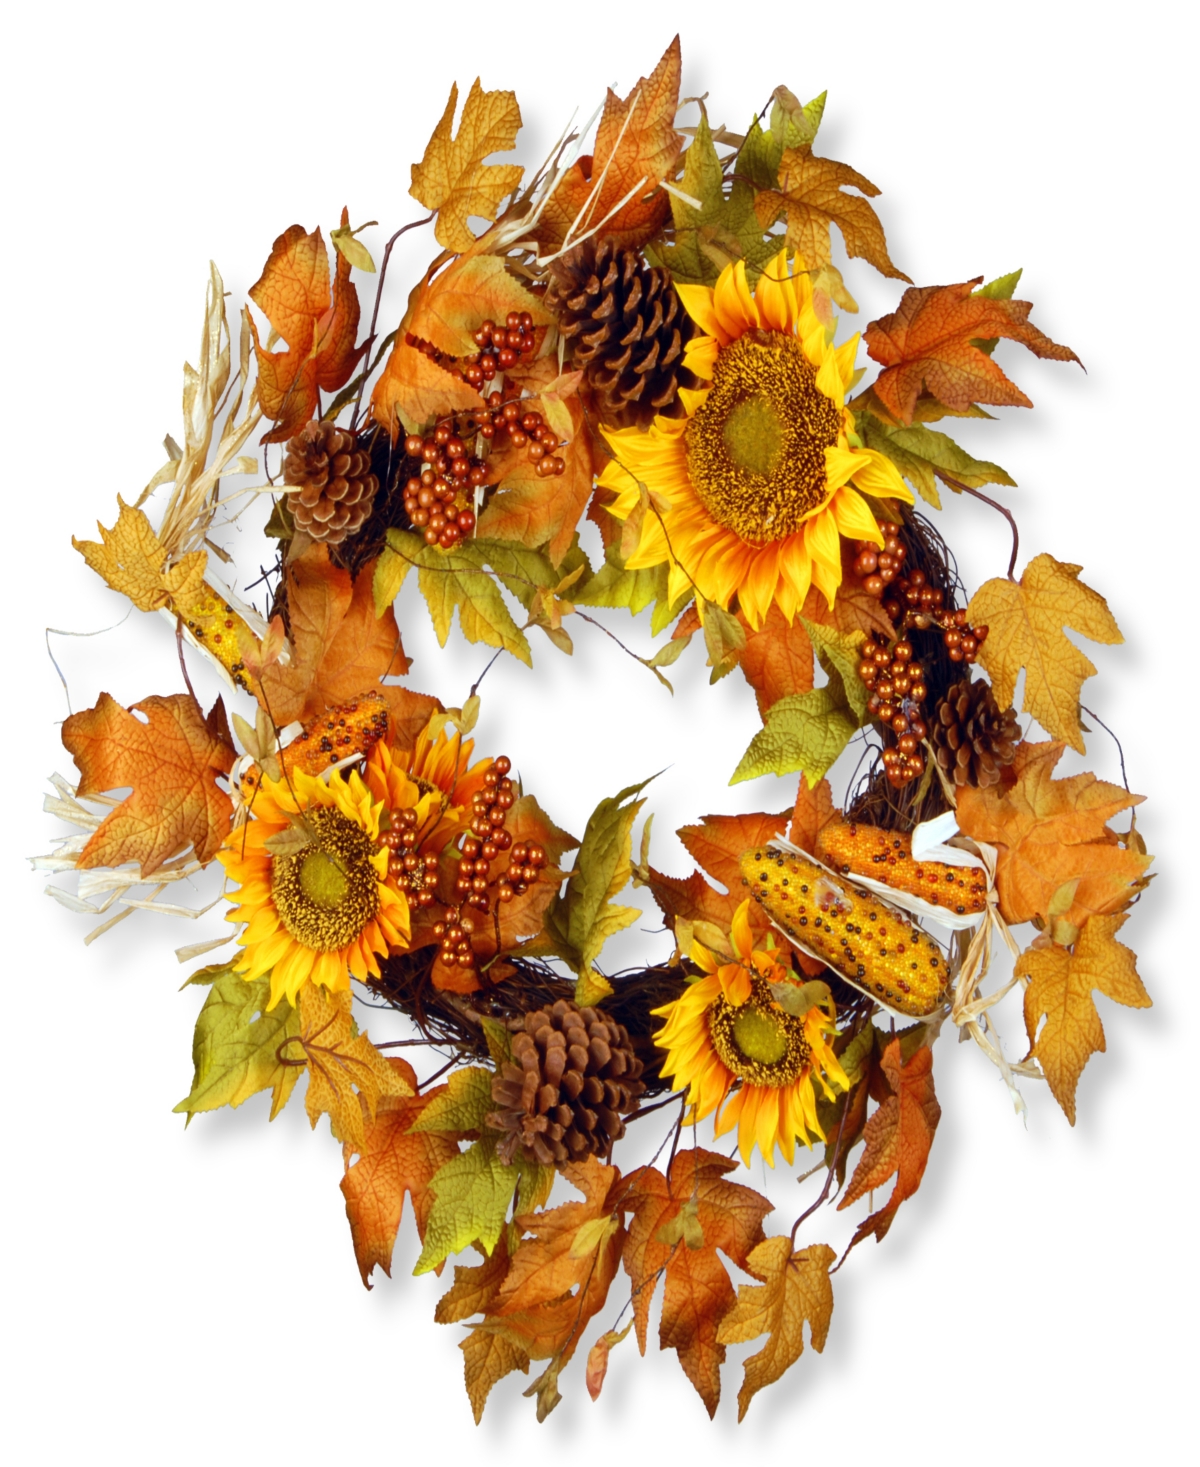 24" Artificial Autumn Wreath, Decorated with Sunflowers, Pinecones, Berry Clusters, Corncobs, Maple Leaves, Autumn Collection -